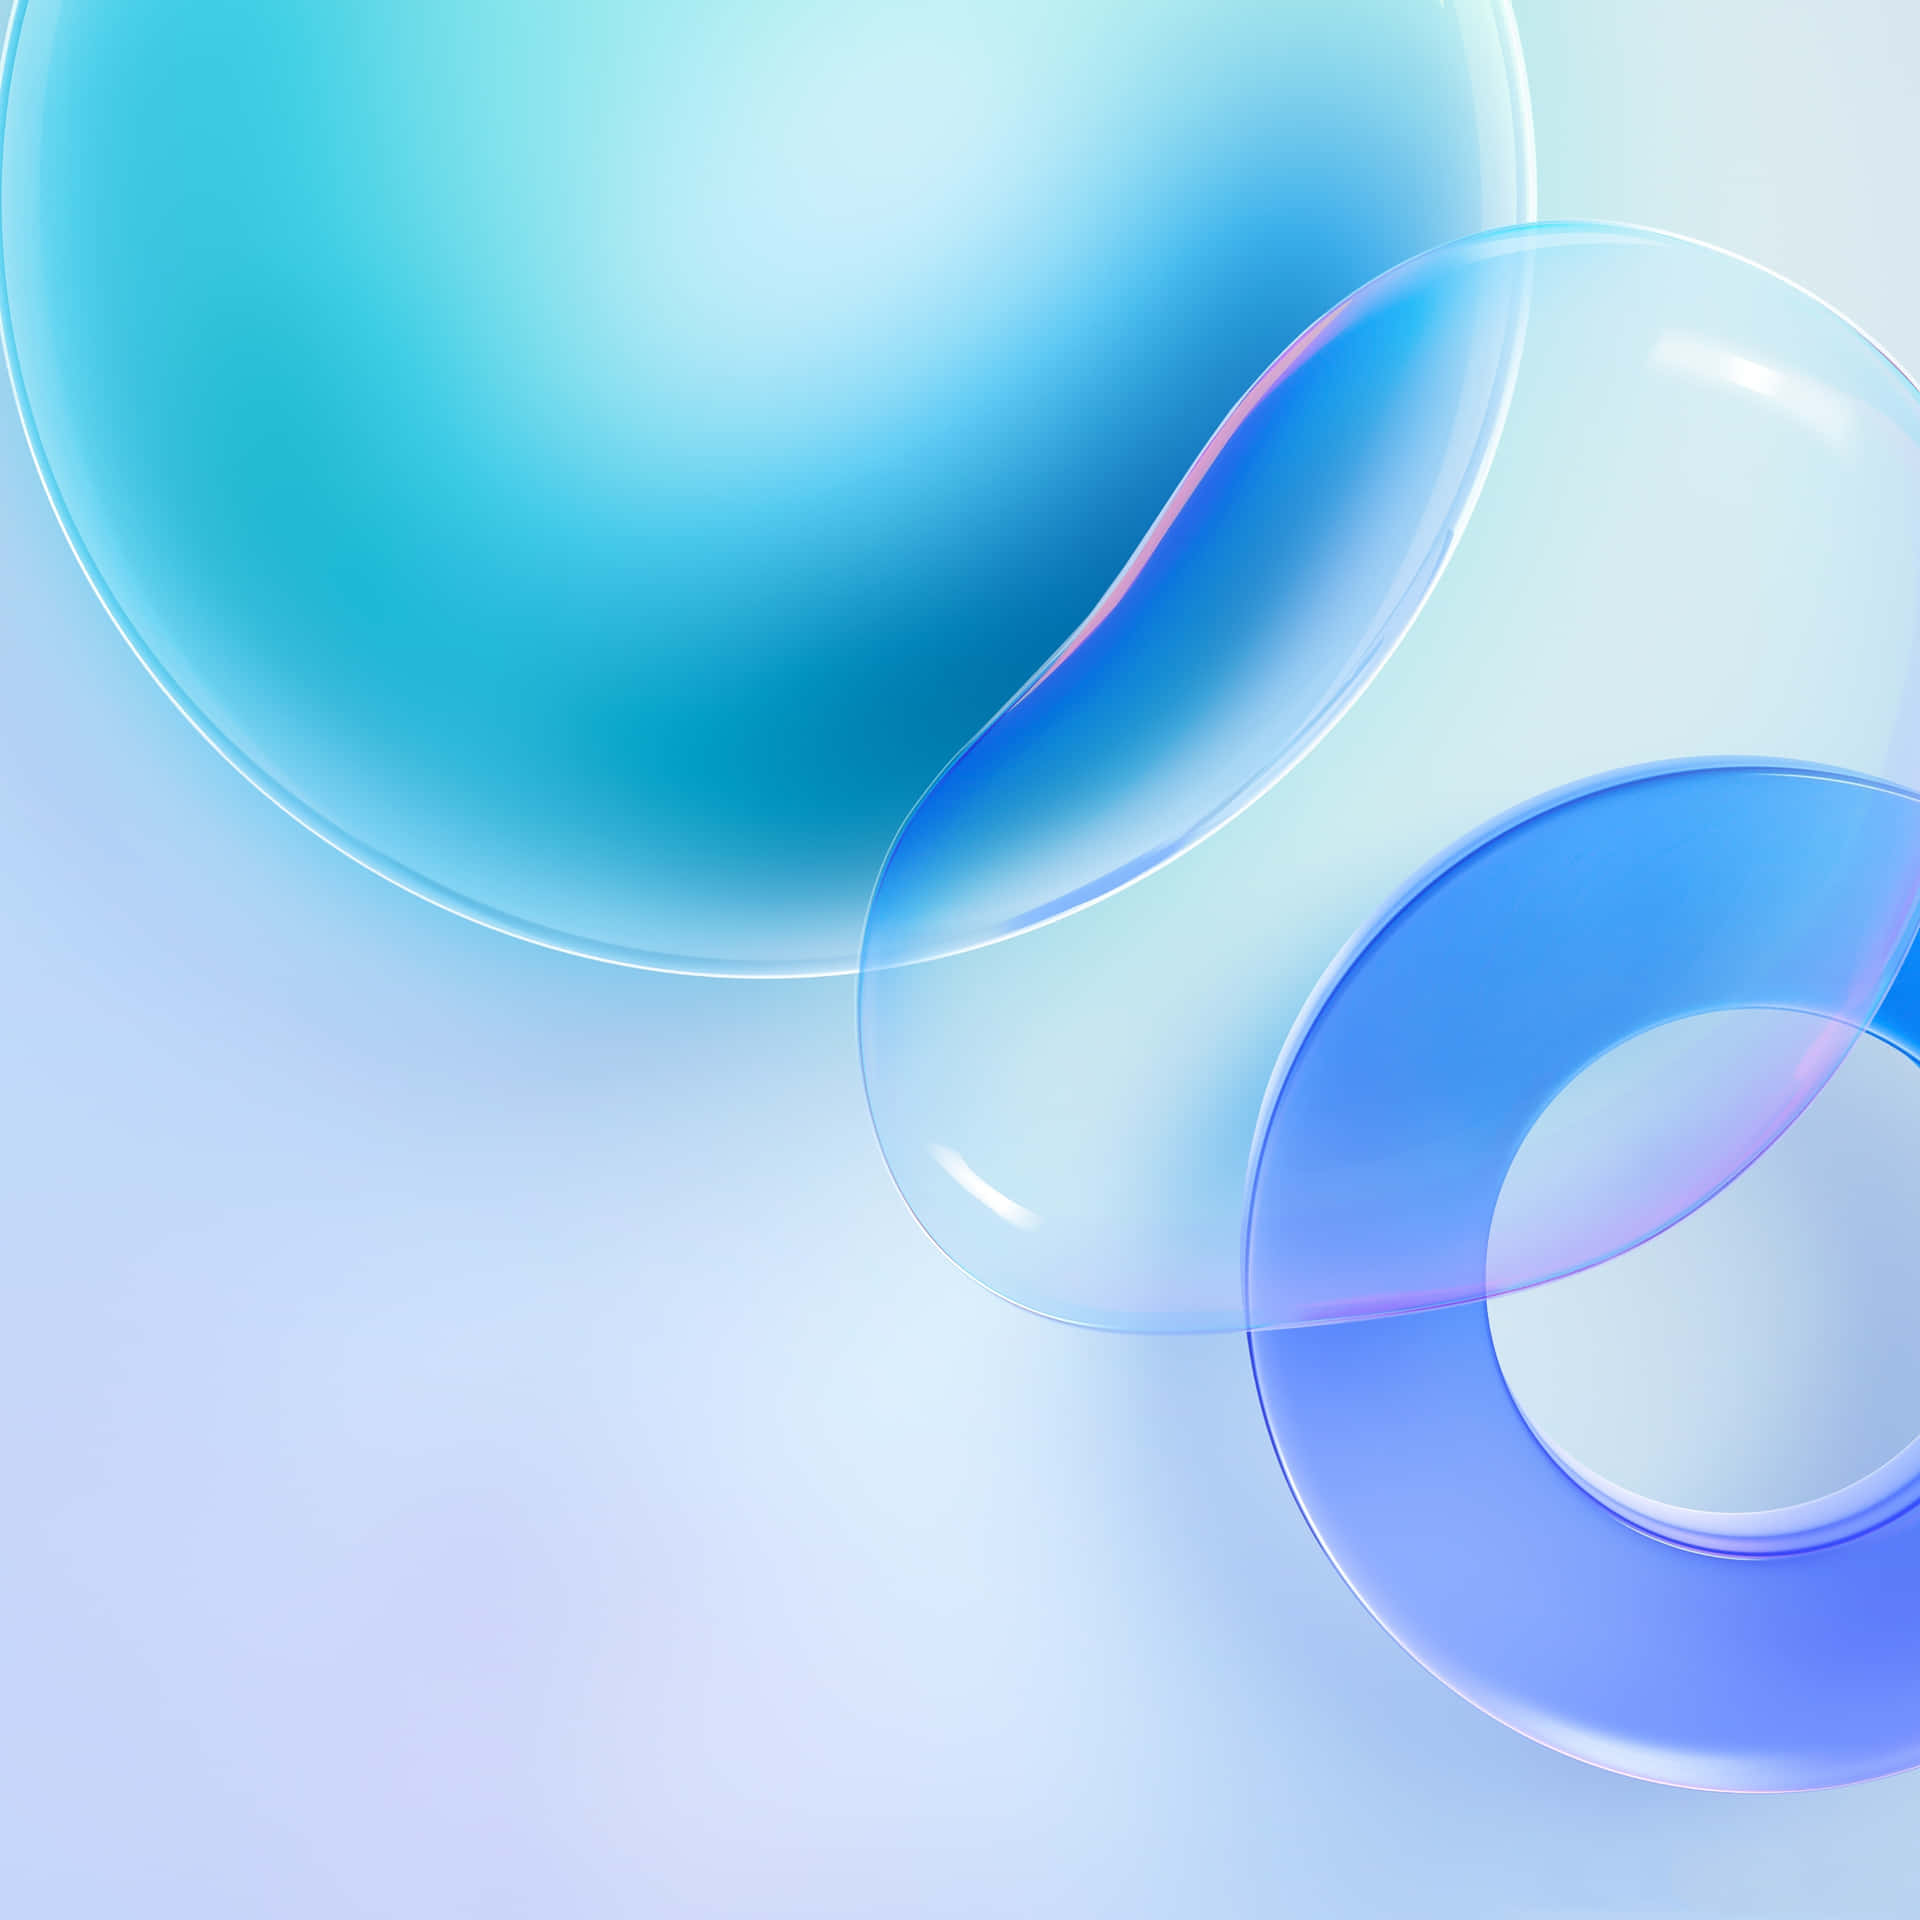 A Blue And White Background With A Blue Circle